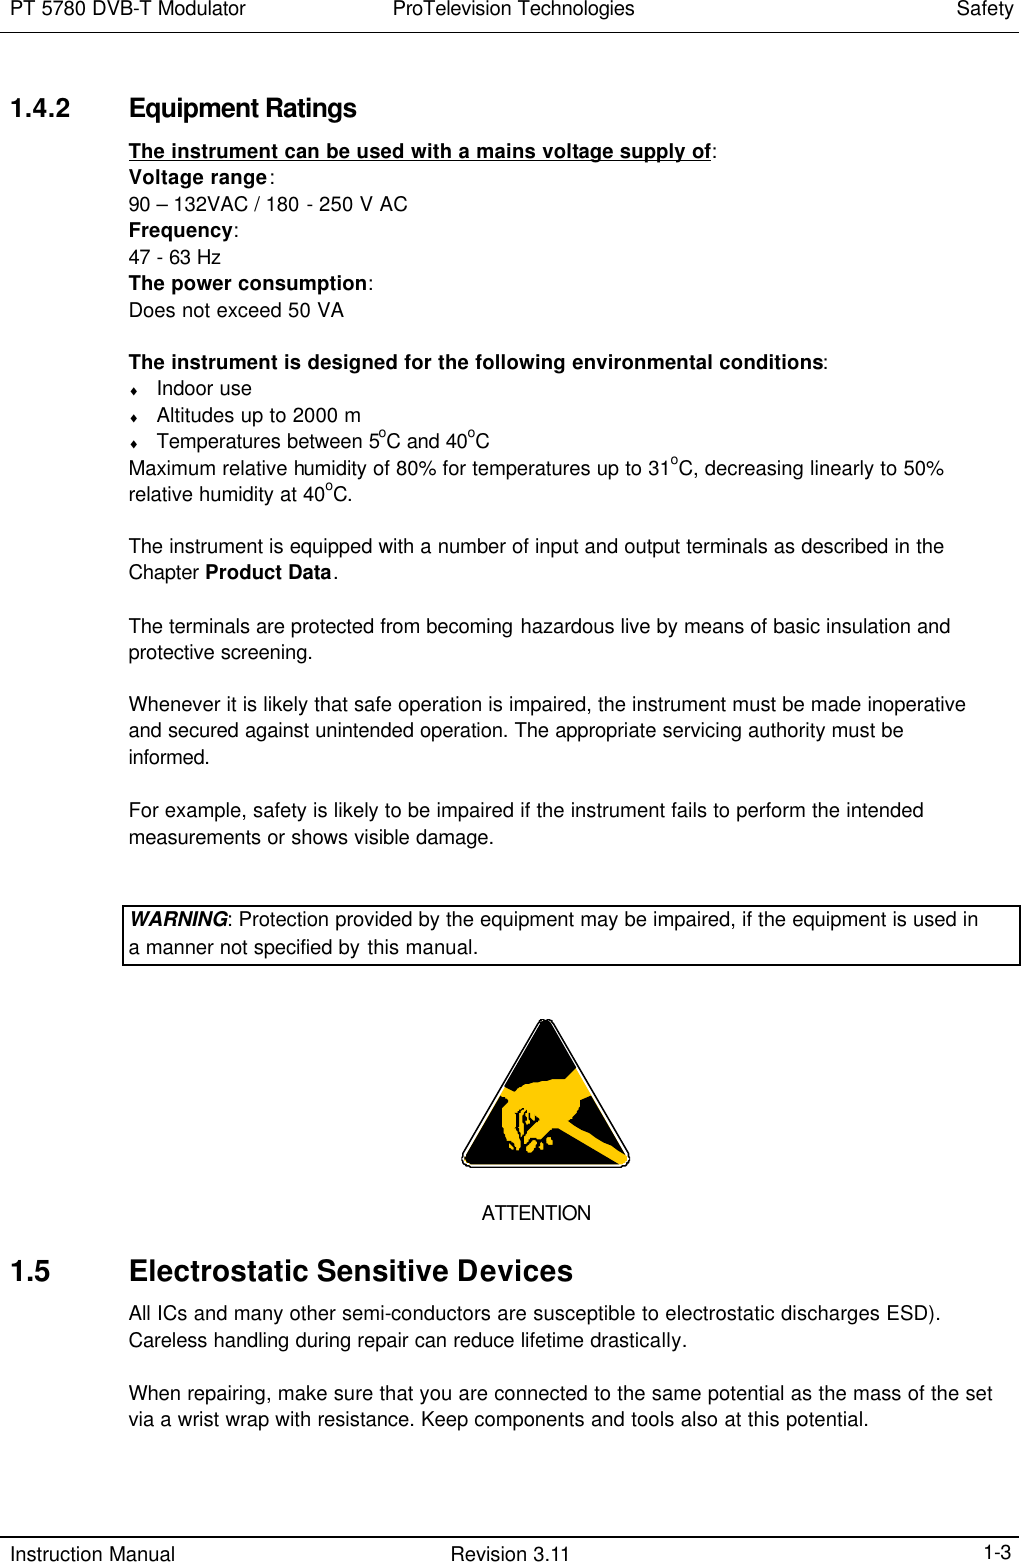 PT 5780 DVB-T Modulator  ProTelevision Technologies Safety  Instruction Manual Revision 3.11    1-3 1.4.2 Equipment Ratings The instrument can be used with a mains voltage supply of: Voltage range: 90 – 132VAC / 180 - 250 V AC Frequency: 47 - 63 Hz The power consumption: Does not exceed 50 VA  The instrument is designed for the following environmental conditions: ♦ Indoor use ♦ Altitudes up to 2000 m ♦ Temperatures between 5oC and 40oC  Maximum relative humidity of 80% for temperatures up to 31oC, decreasing linearly to 50% relative humidity at 40oC.  The instrument is equipped with a number of input and output terminals as described in the Chapter Product Data.   The terminals are protected from becoming hazardous live by means of basic insulation and protective screening.  Whenever it is likely that safe operation is impaired, the instrument must be made inoperative and secured against unintended operation. The appropriate servicing authority must be informed.  For example, safety is likely to be impaired if the instrument fails to perform the intended measurements or shows visible damage.   WARNING: Protection provided by the equipment may be impaired, if the equipment is used in a manner not specified by this manual.       ATTENTION 1.5 Electrostatic Sensitive Devices All ICs and many other semi-conductors are susceptible to electrostatic discharges ESD). Careless handling during repair can reduce lifetime drastically.  When repairing, make sure that you are connected to the same potential as the mass of the set via a wrist wrap with resistance. Keep components and tools also at this potential.  